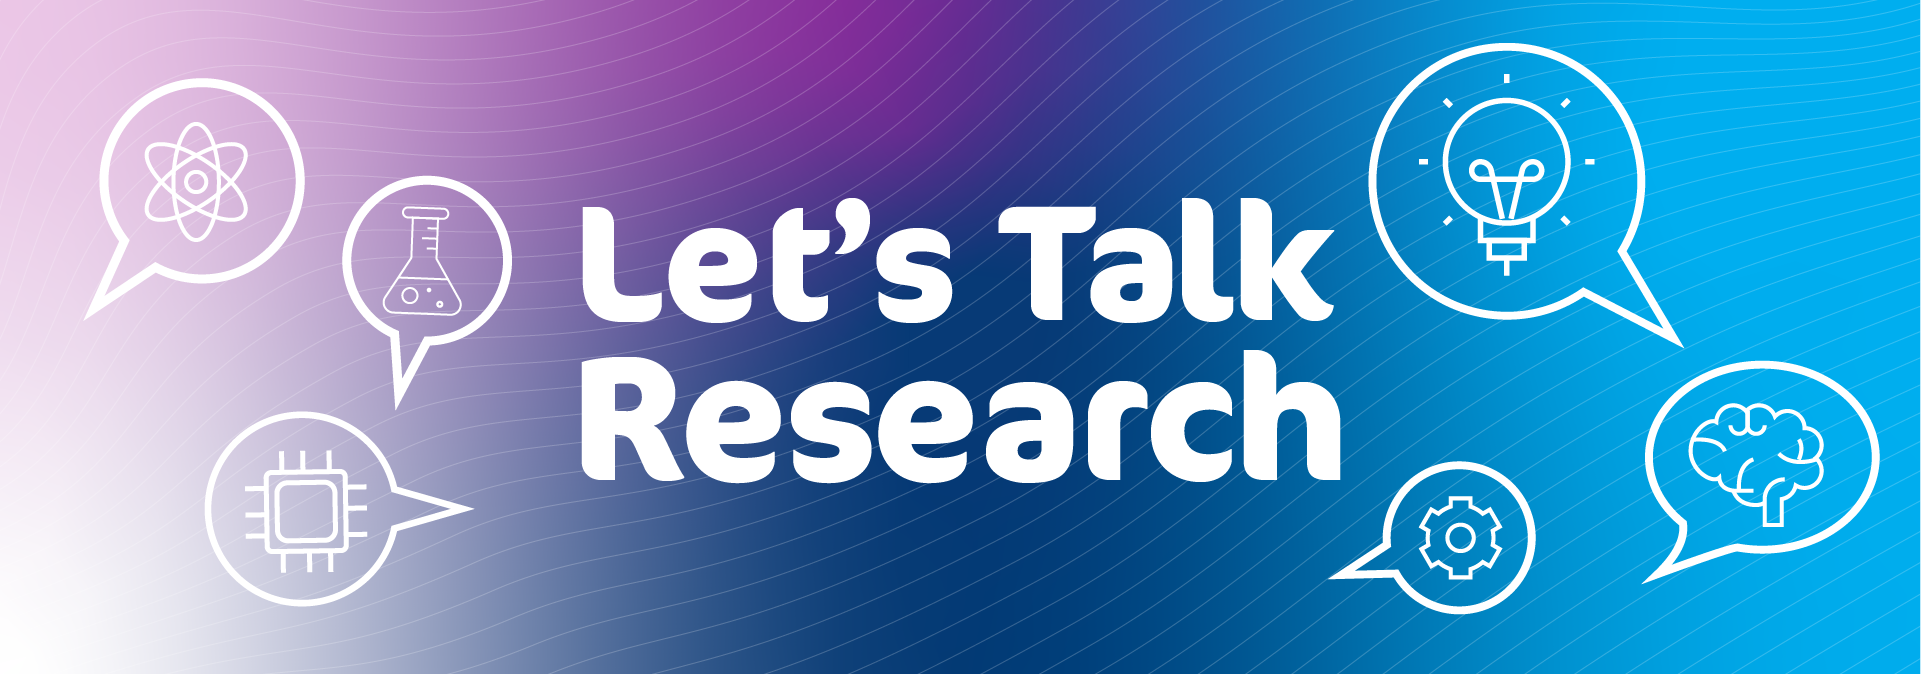 let's talk research banner